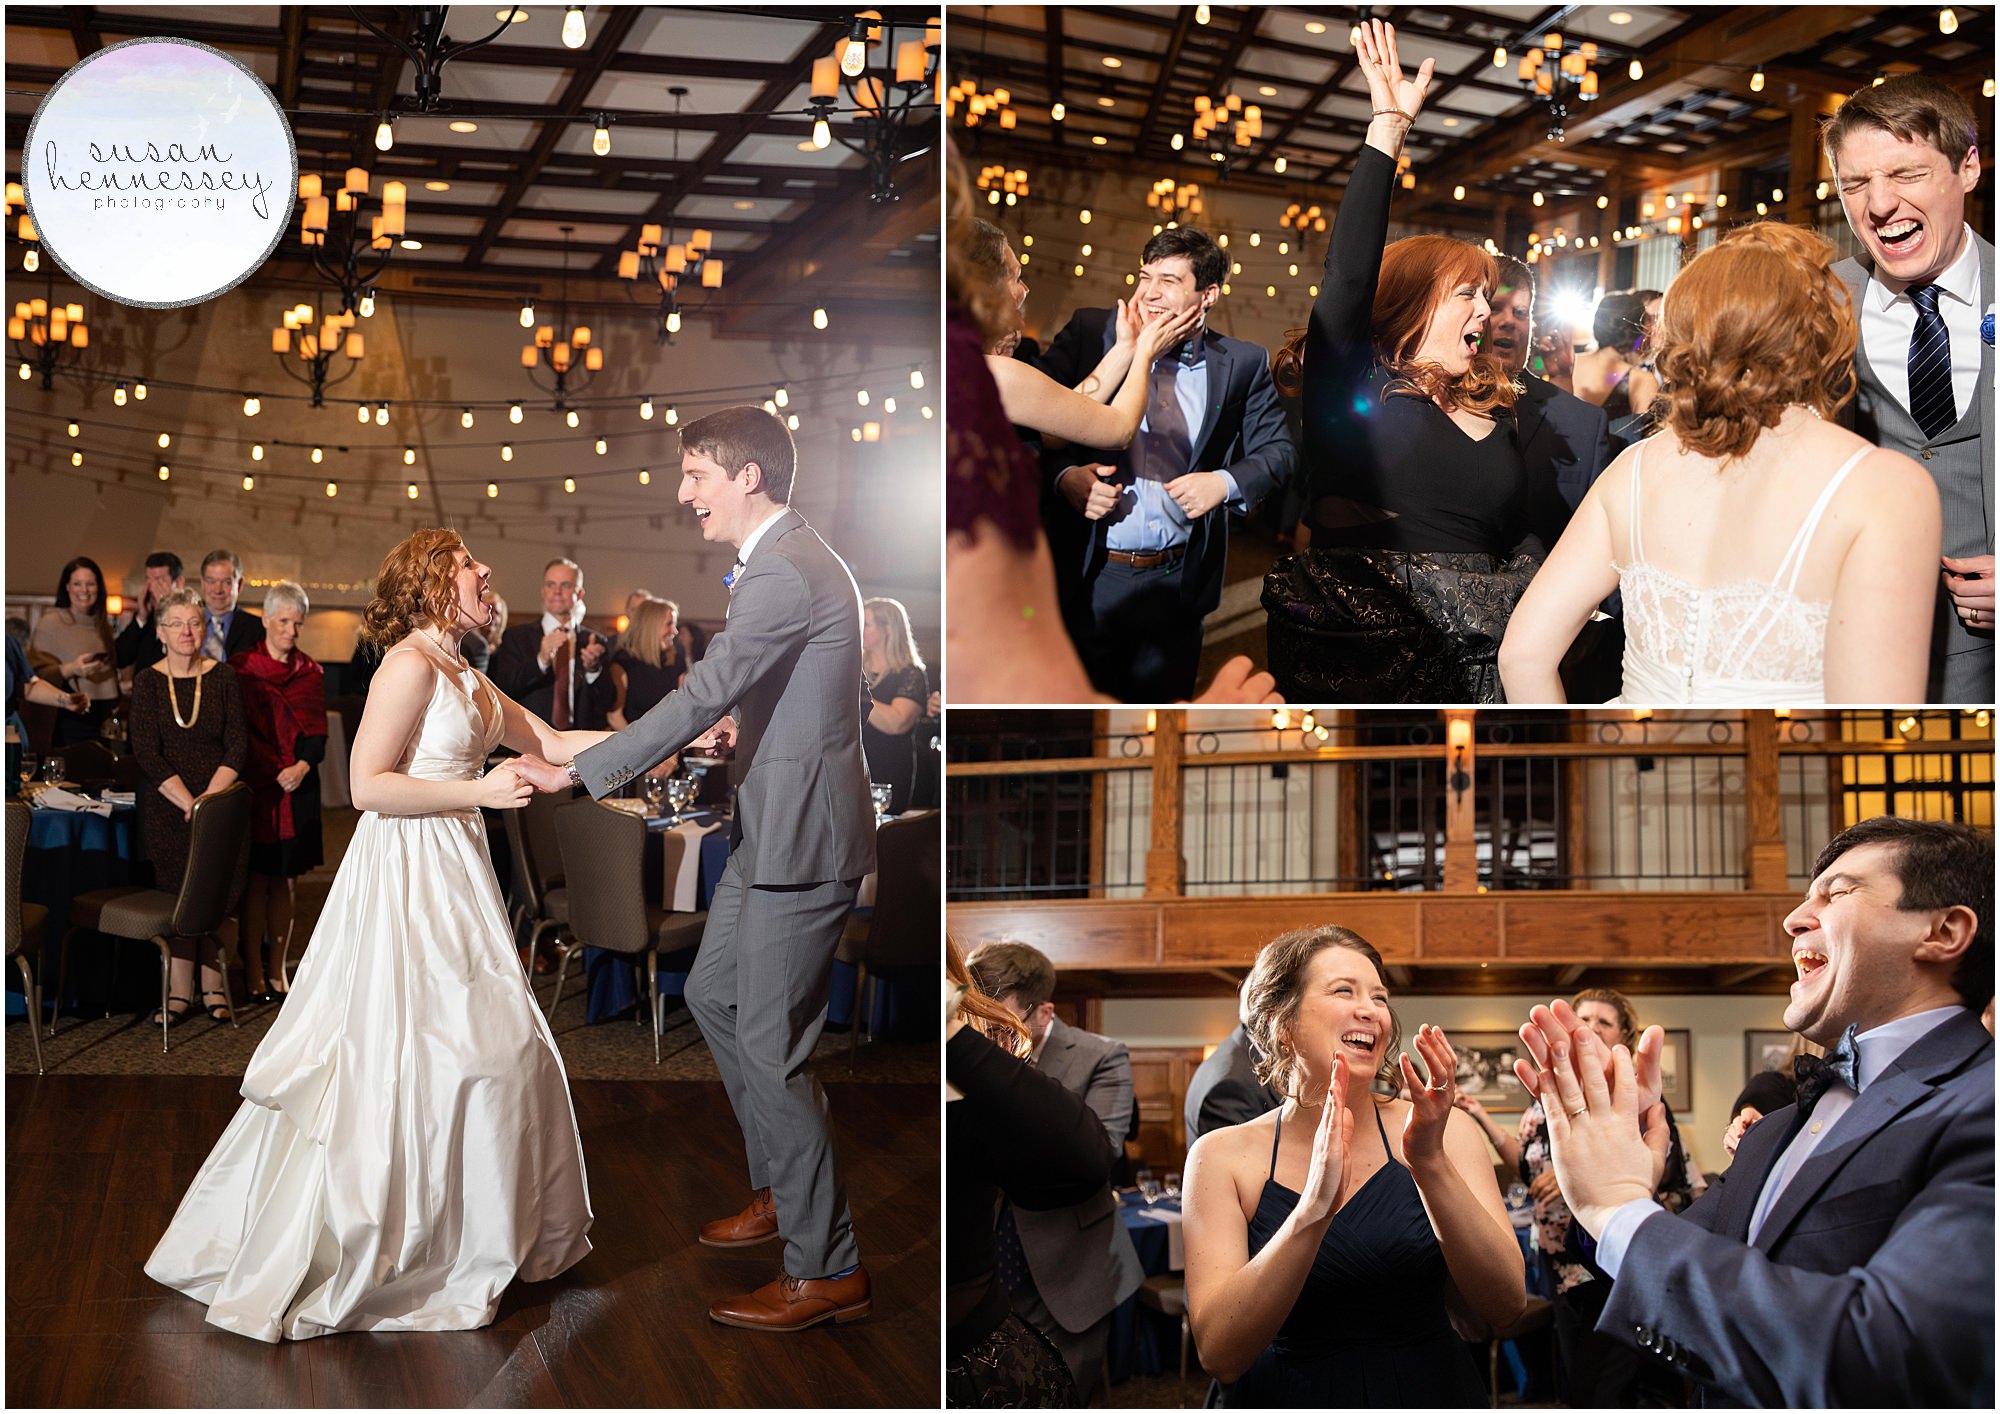 Bride and groom dance at their reception at Moorestown Community House